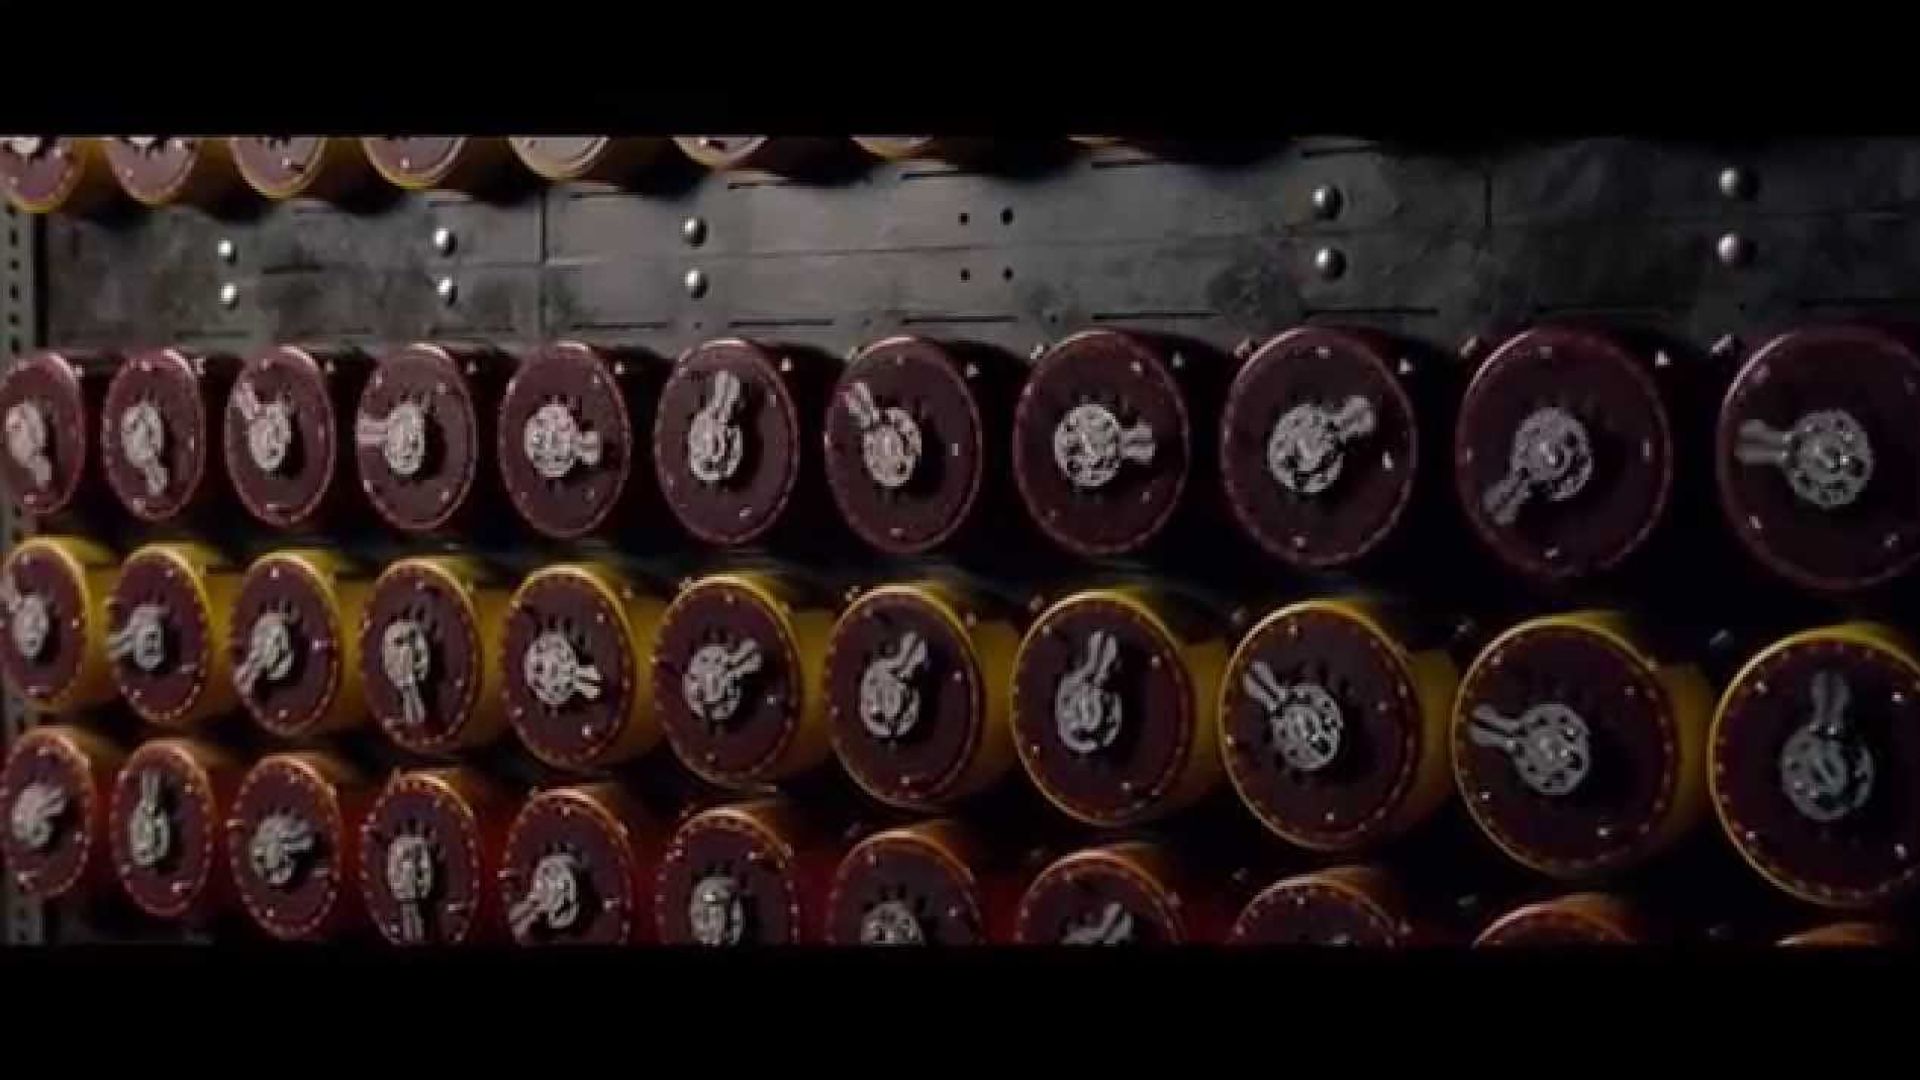 Official Academy Awards Trailer for &#039;The Imitation Game&#039;